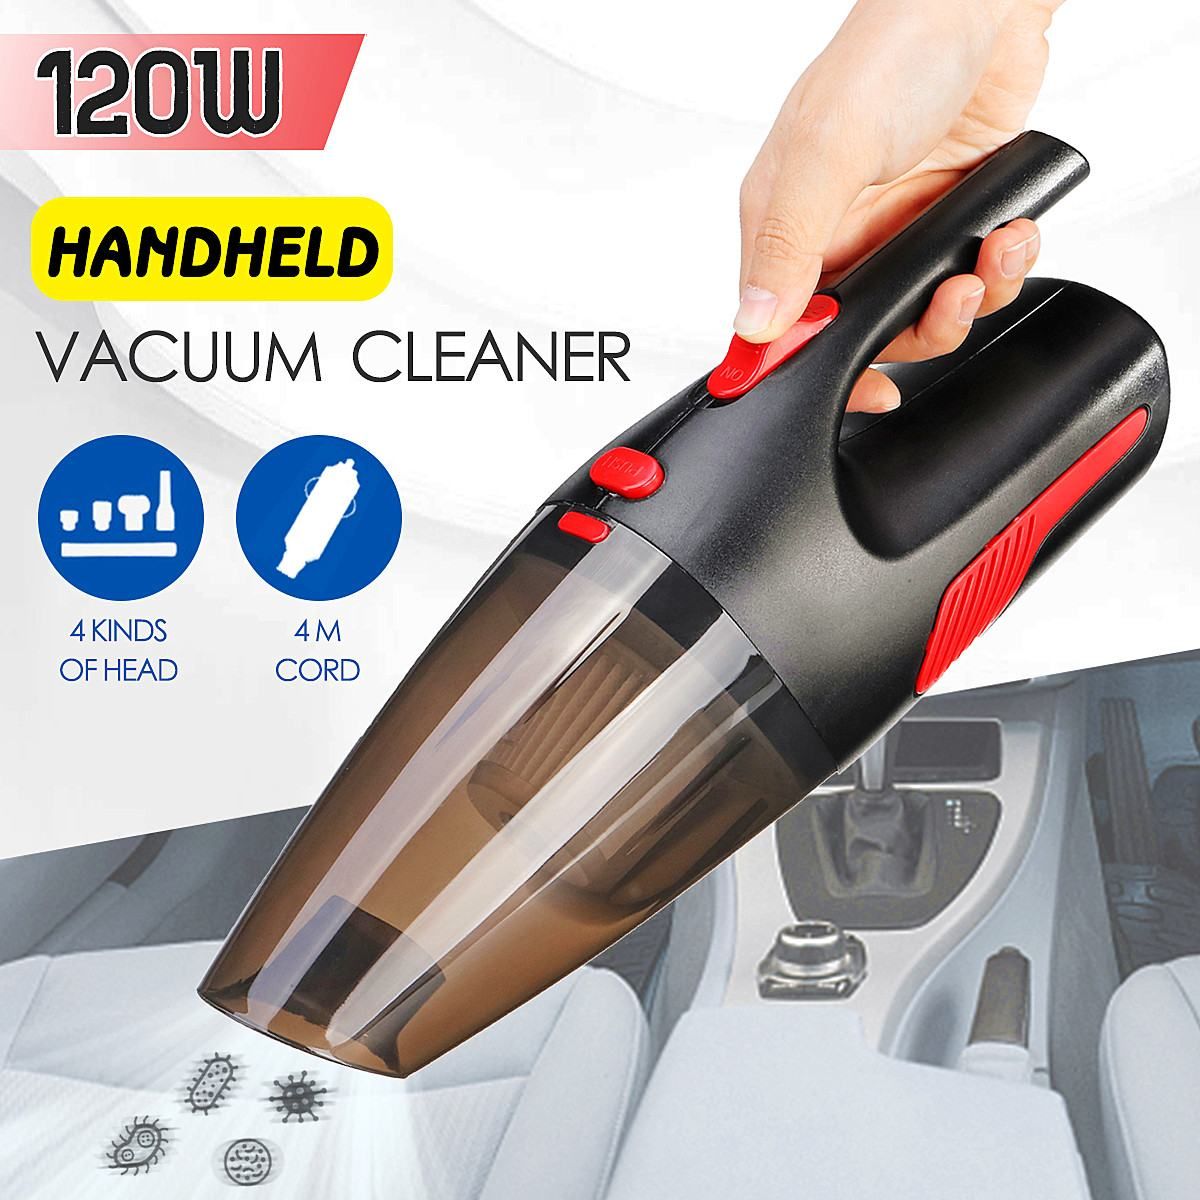 Portable Cordless/Car Plug 120W 12V 5000PA Super Suction Wet/Dry Vaccum Cleaner for Car Home,White FAY Car Vacuum Cleaner Handheld